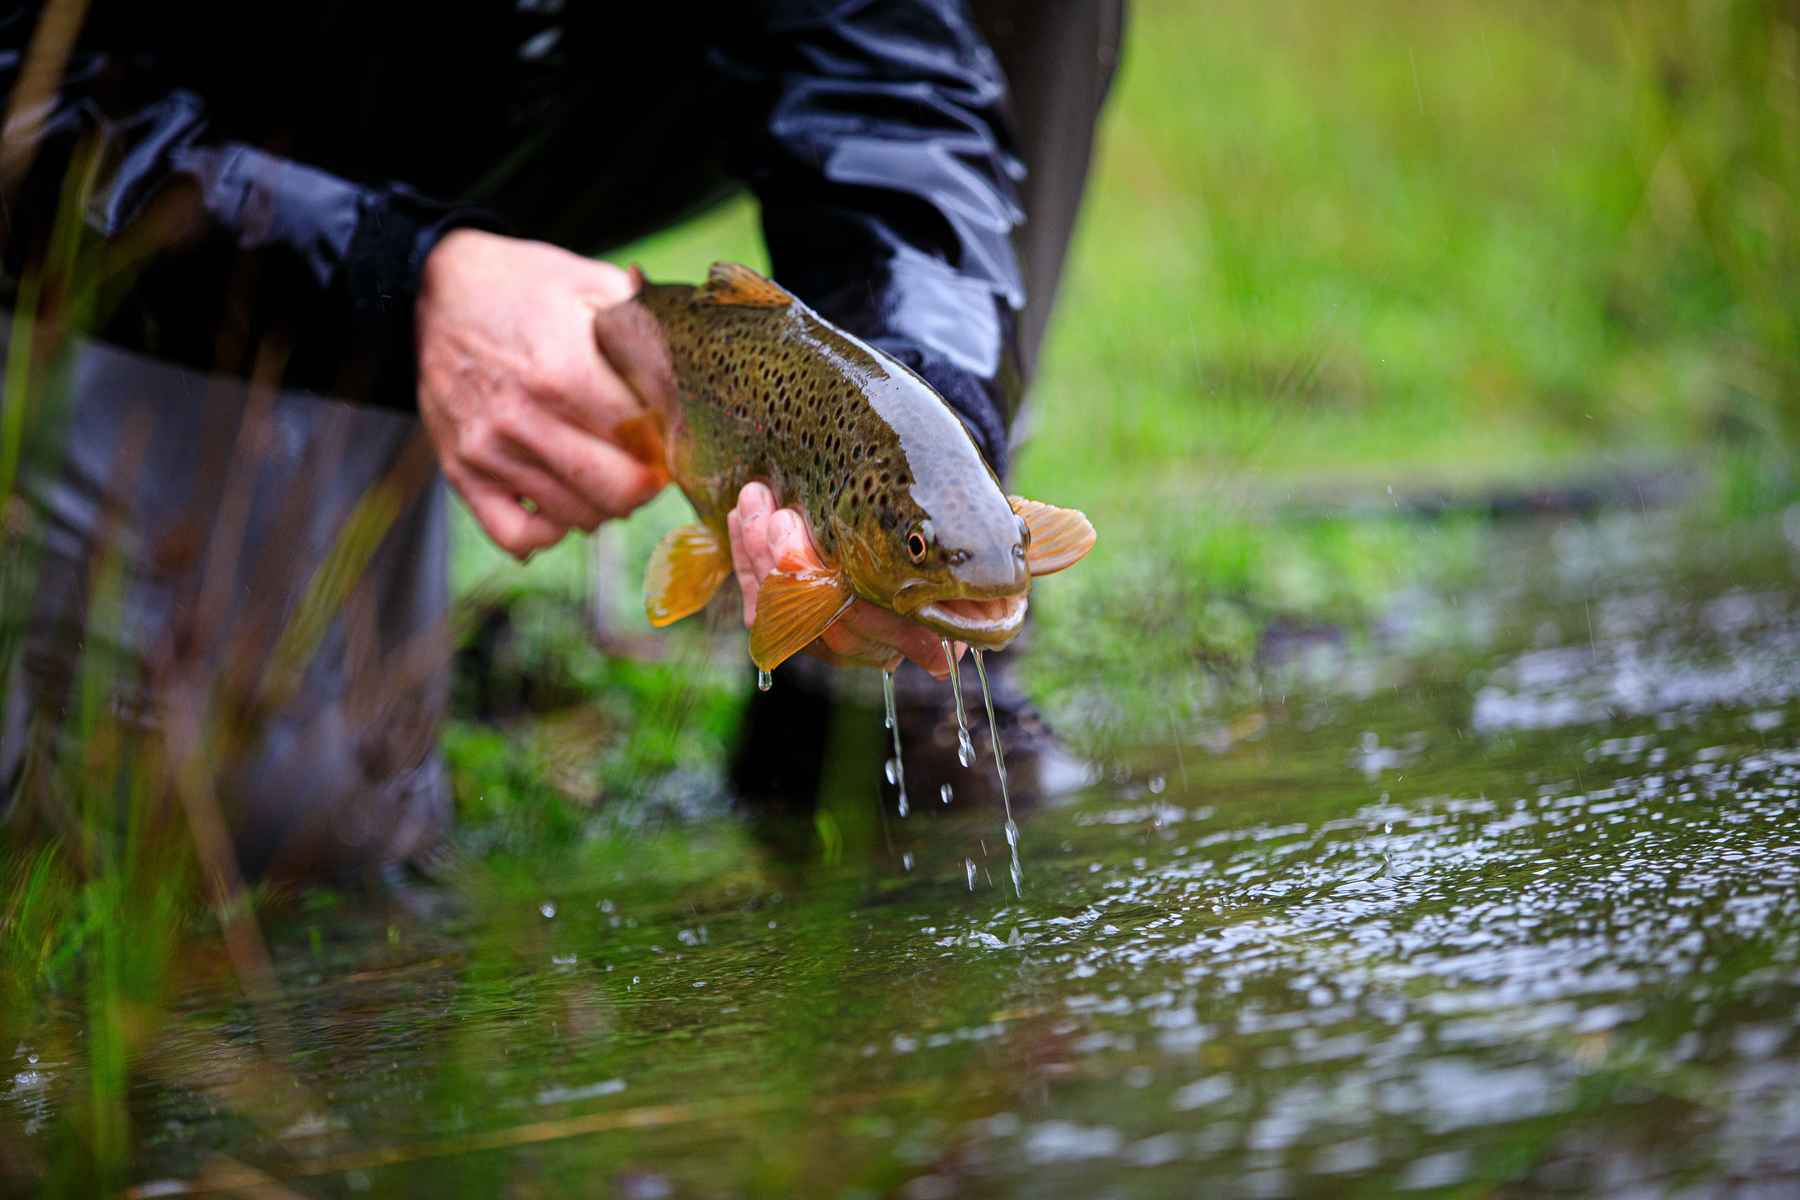 Early fly takes the big trout, Outdoors